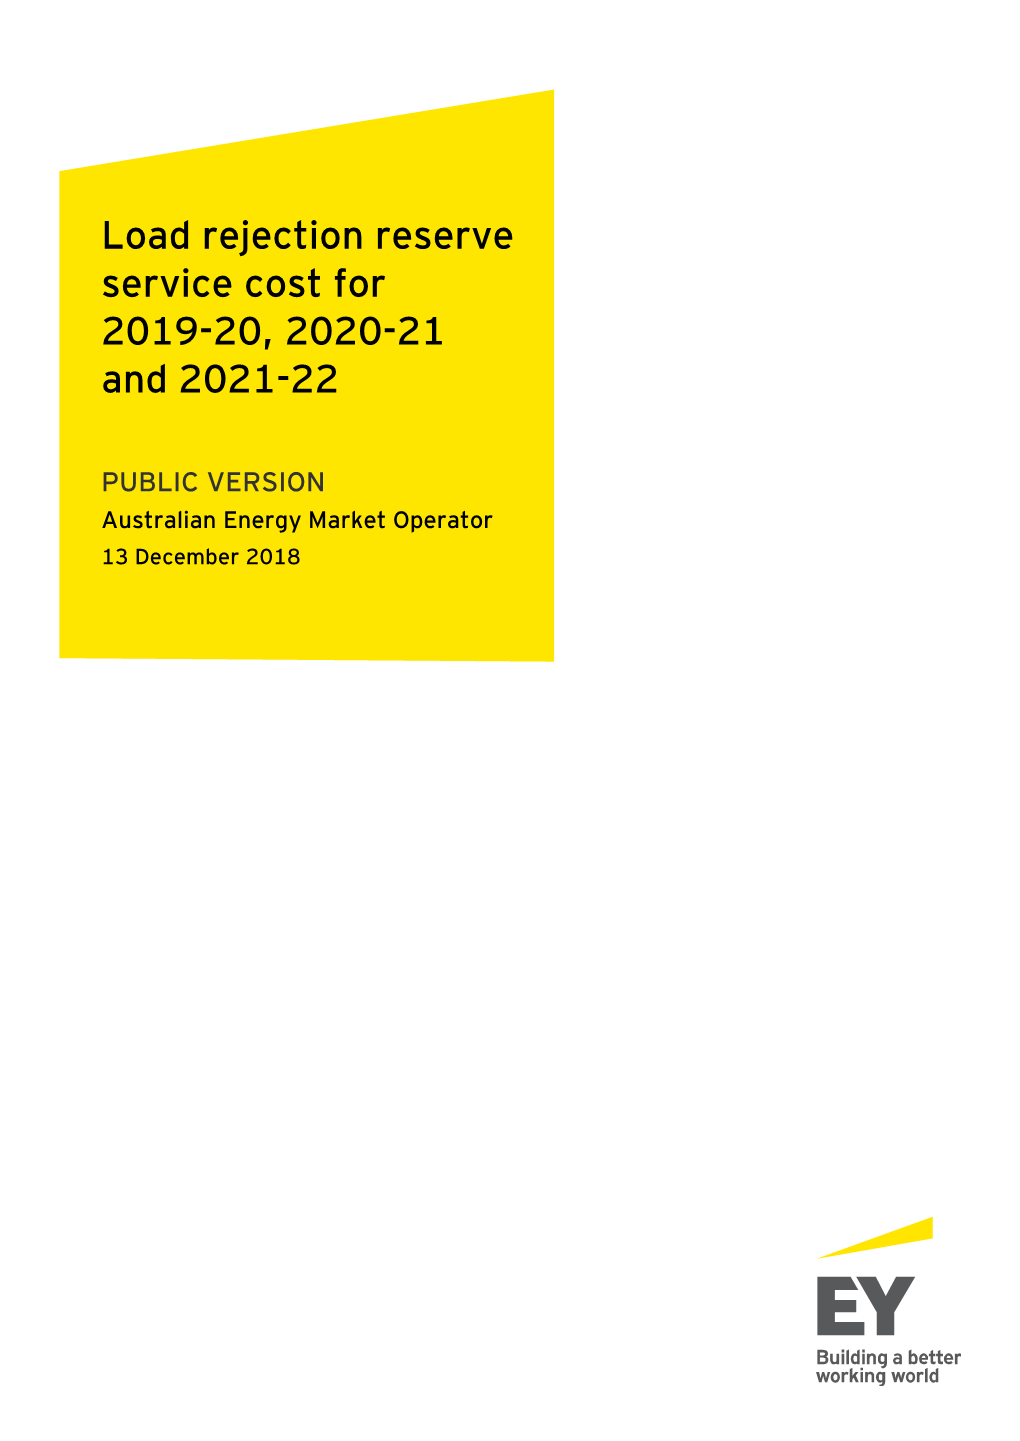 Load Rejection Reserve Service Cost for 2019-20, 2020-21 and 2021-22